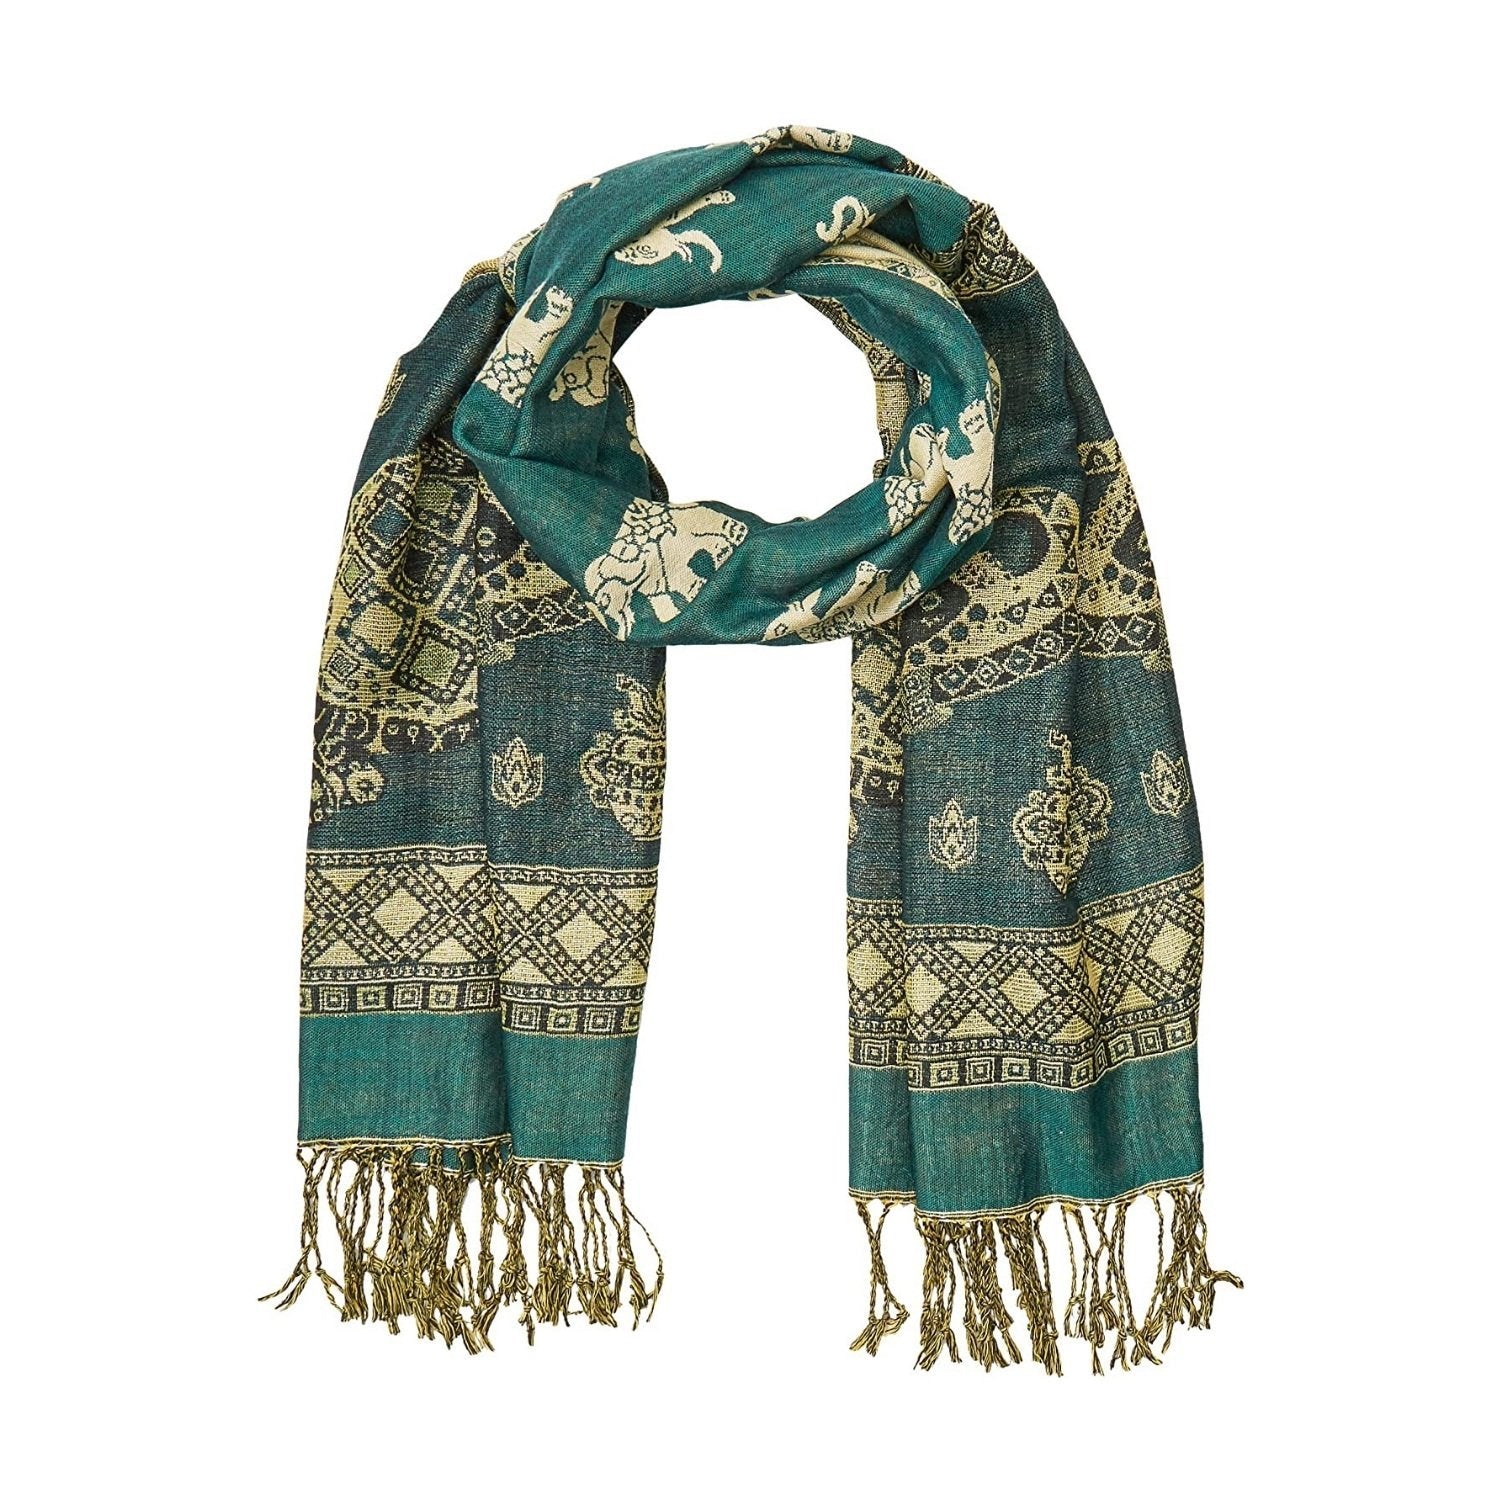 AGRA ELEPHANT SCARF Elepanta Scarves - Buy Today Elephant Pants Jewelry And Bohemian Clothes Handmade In Thailand Help To Save The Elephants FairTrade And Vegan